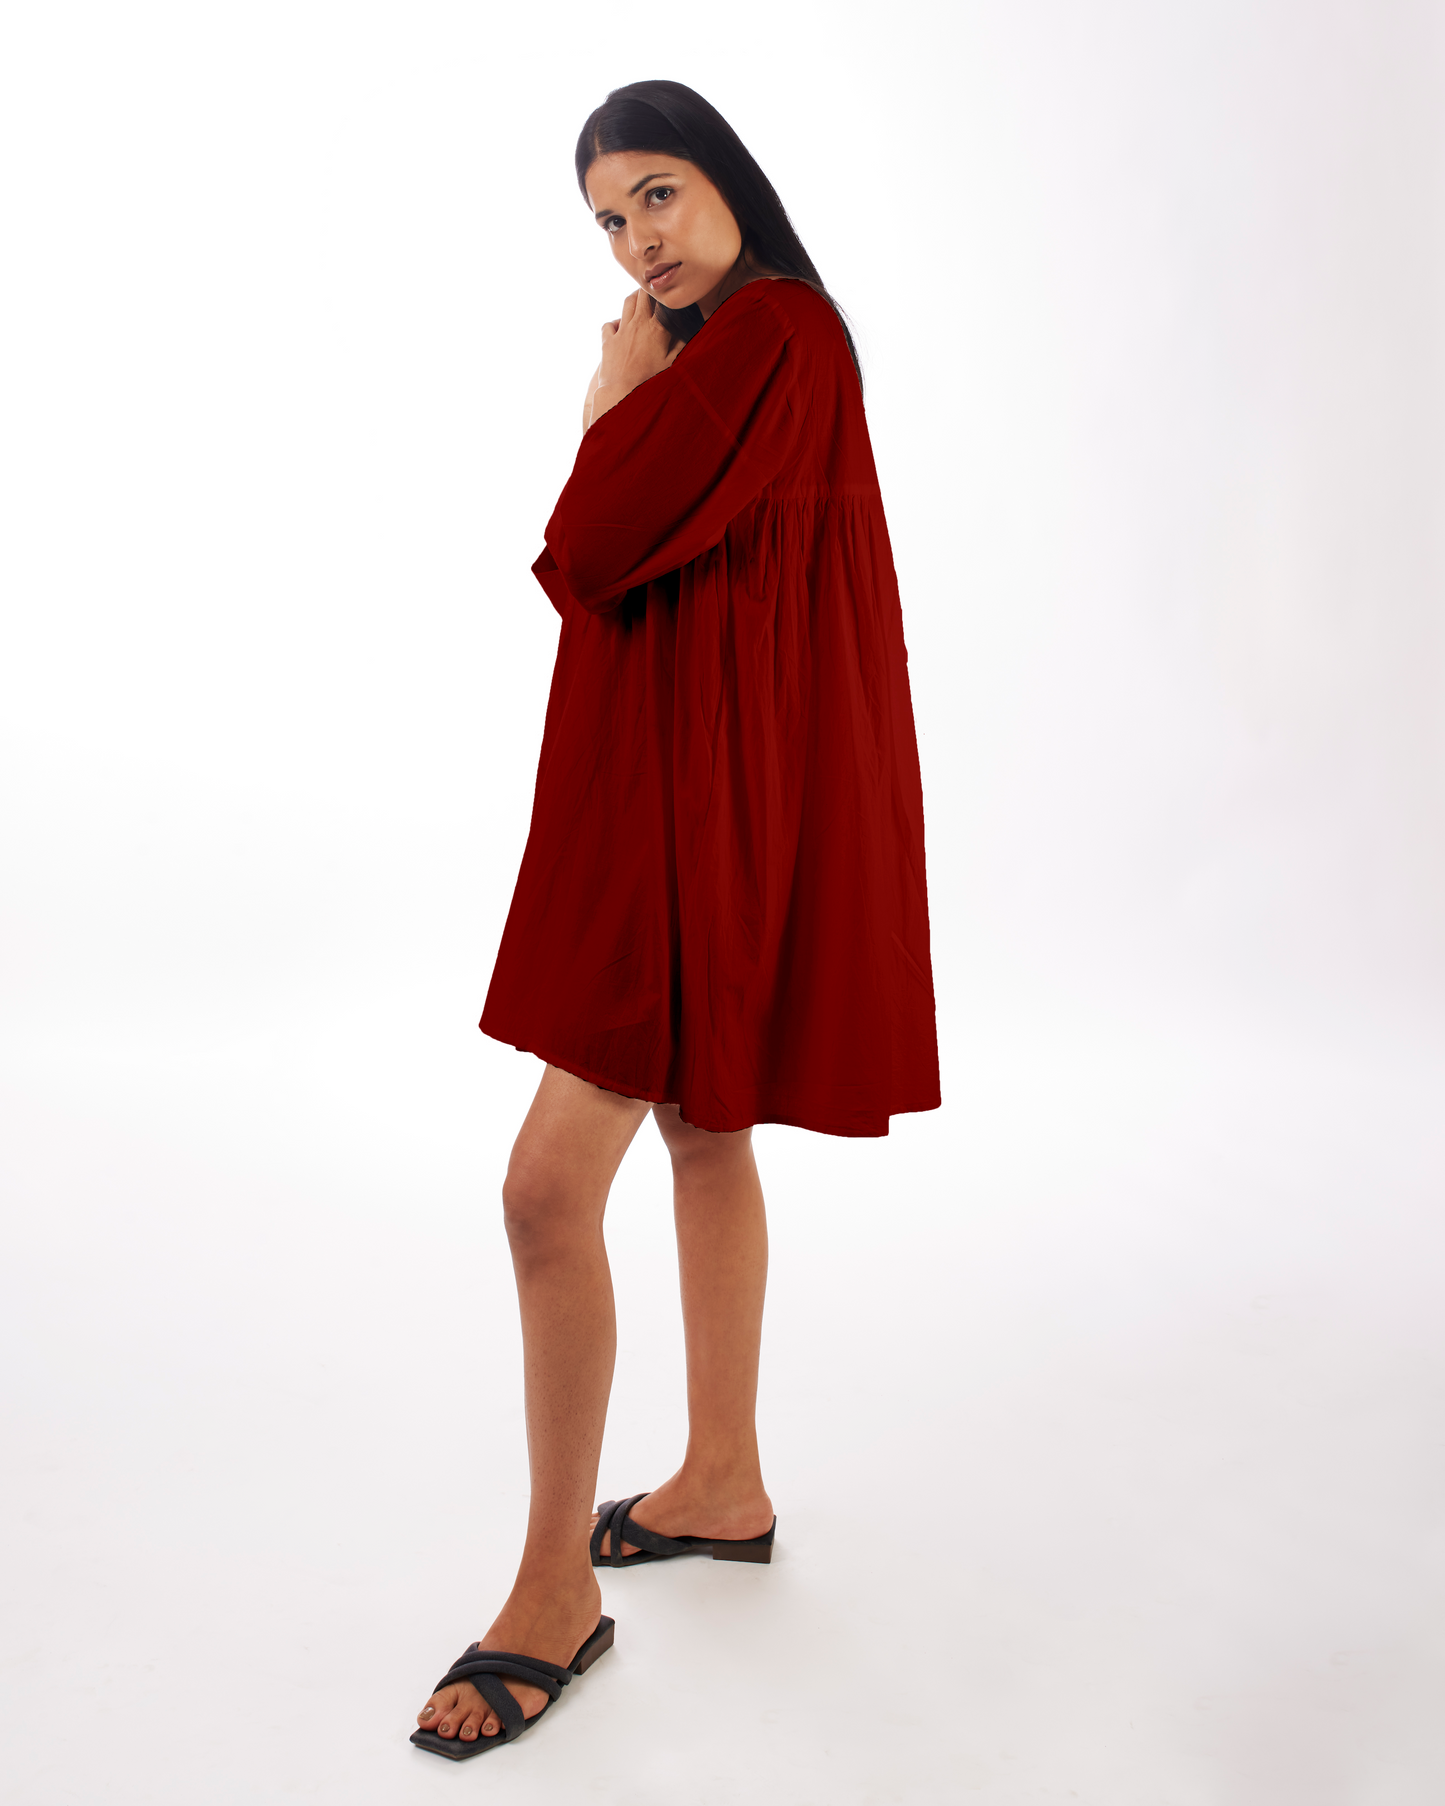 Red Yoke Mini Dress by Kamakhyaa with 100% pure cotton, Casual Wear, FB ADS JUNE, Fitted At Waist, KKYSS, Loose Fit, Mini Dresses, Naturally Made, Red, Solids, Summer Sutra, Womenswear at Kamakhyaa for sustainable fashion